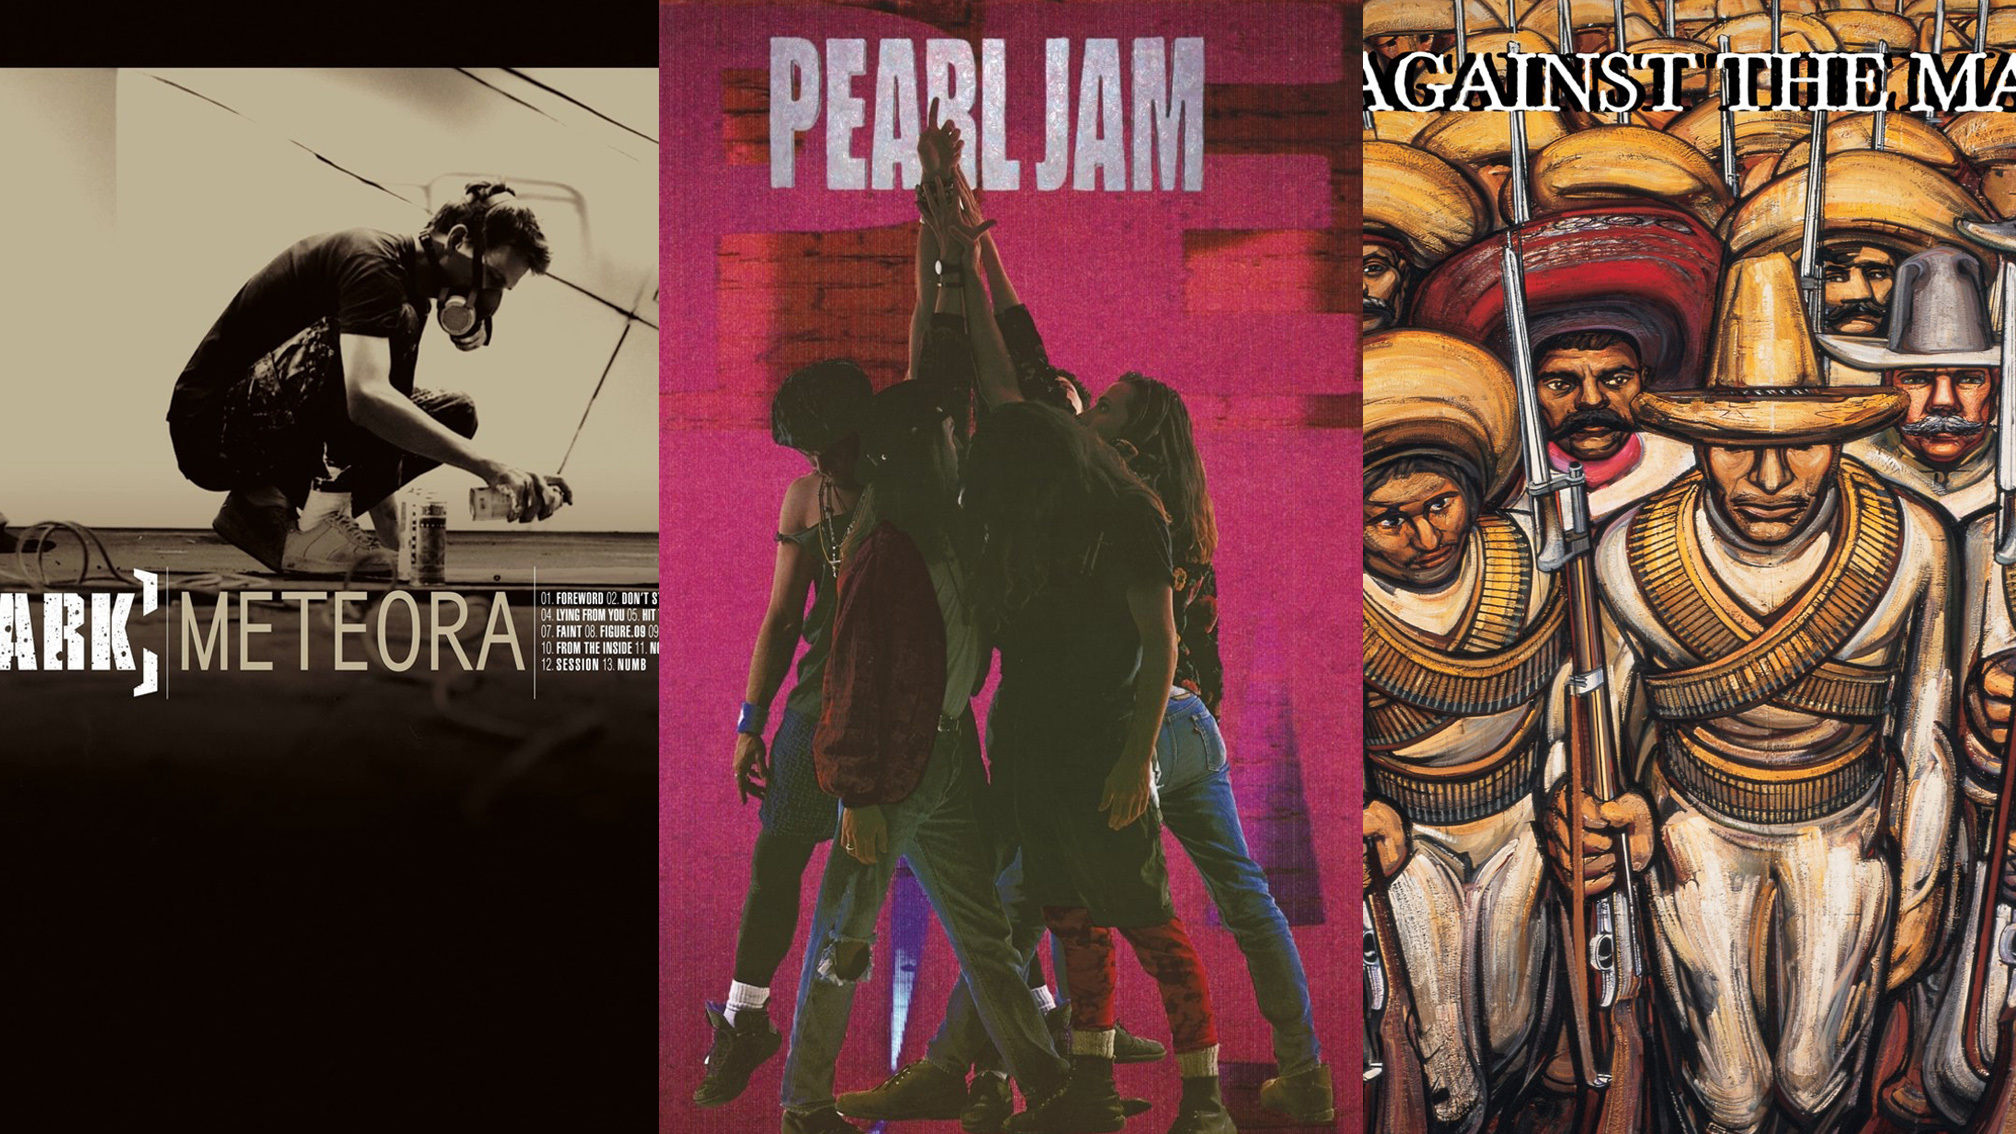 pearl jam albums best to worst